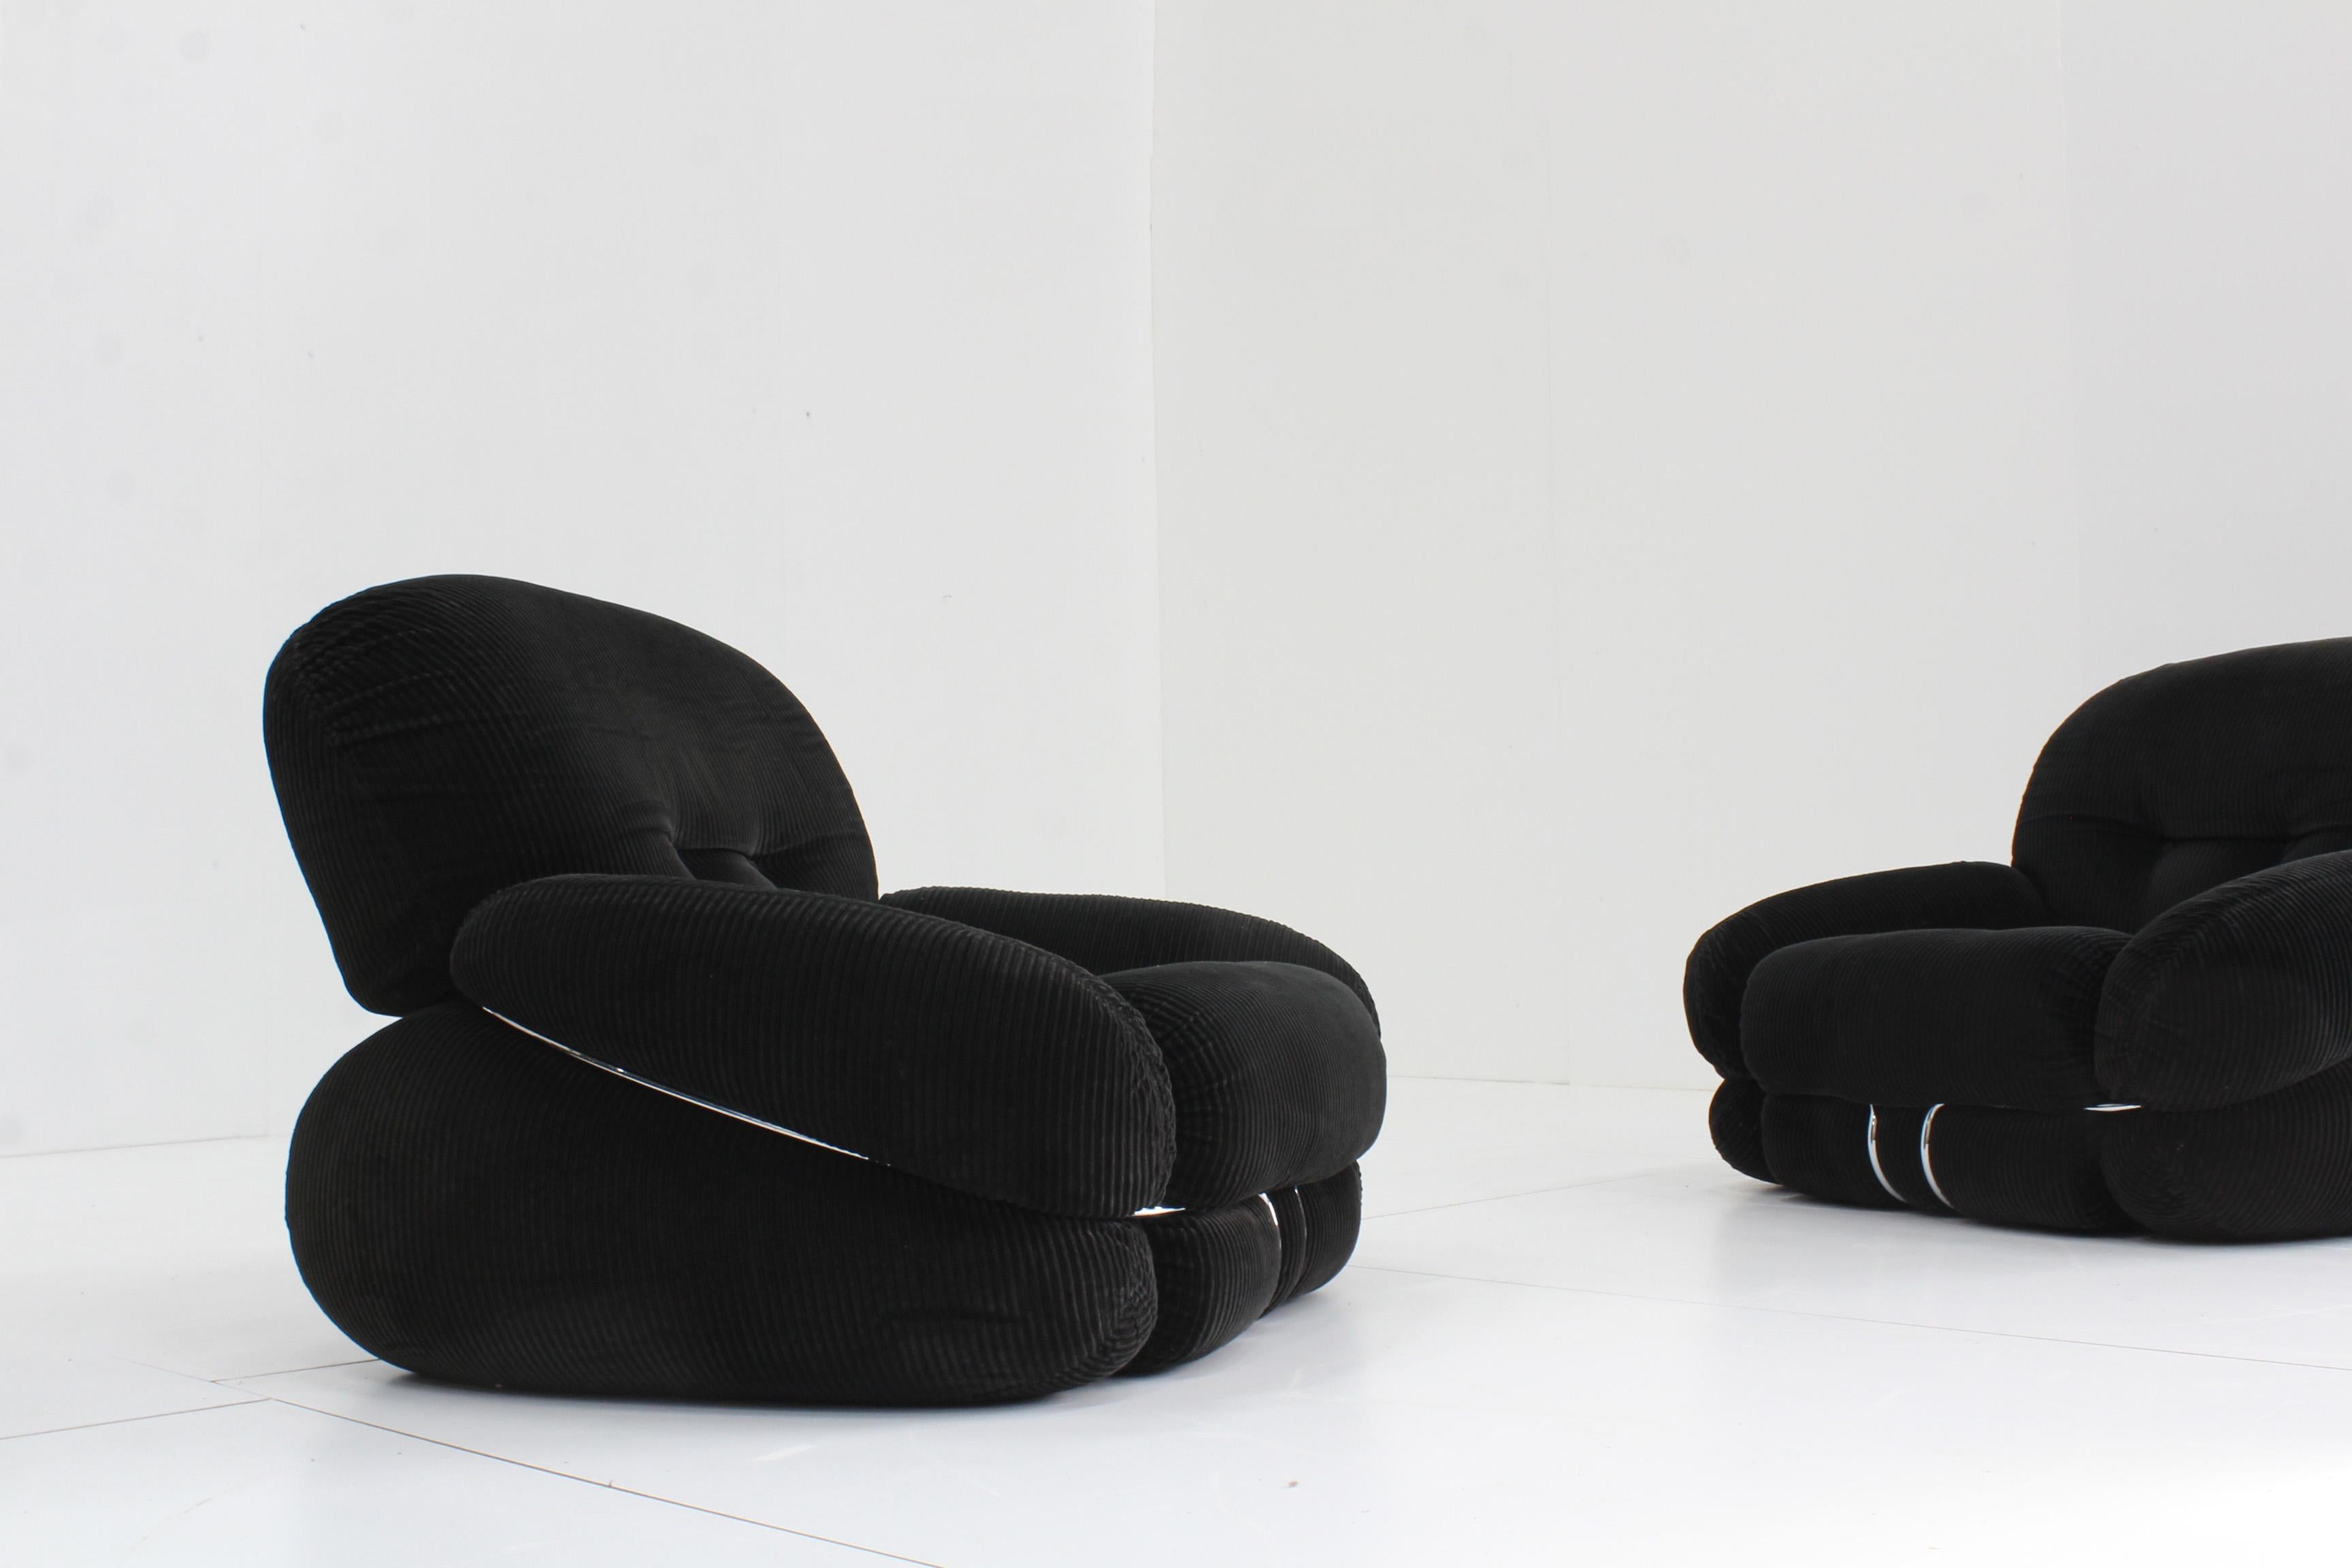 Black cordaroy Okay armchair designed by Italian designer Adriano Piazzesi in the 1970s. This comfy chair is in a good condition with minor traces of use. This chair has a black cordaroy / rib fabric with a chromed metal structure.

Price is for 1